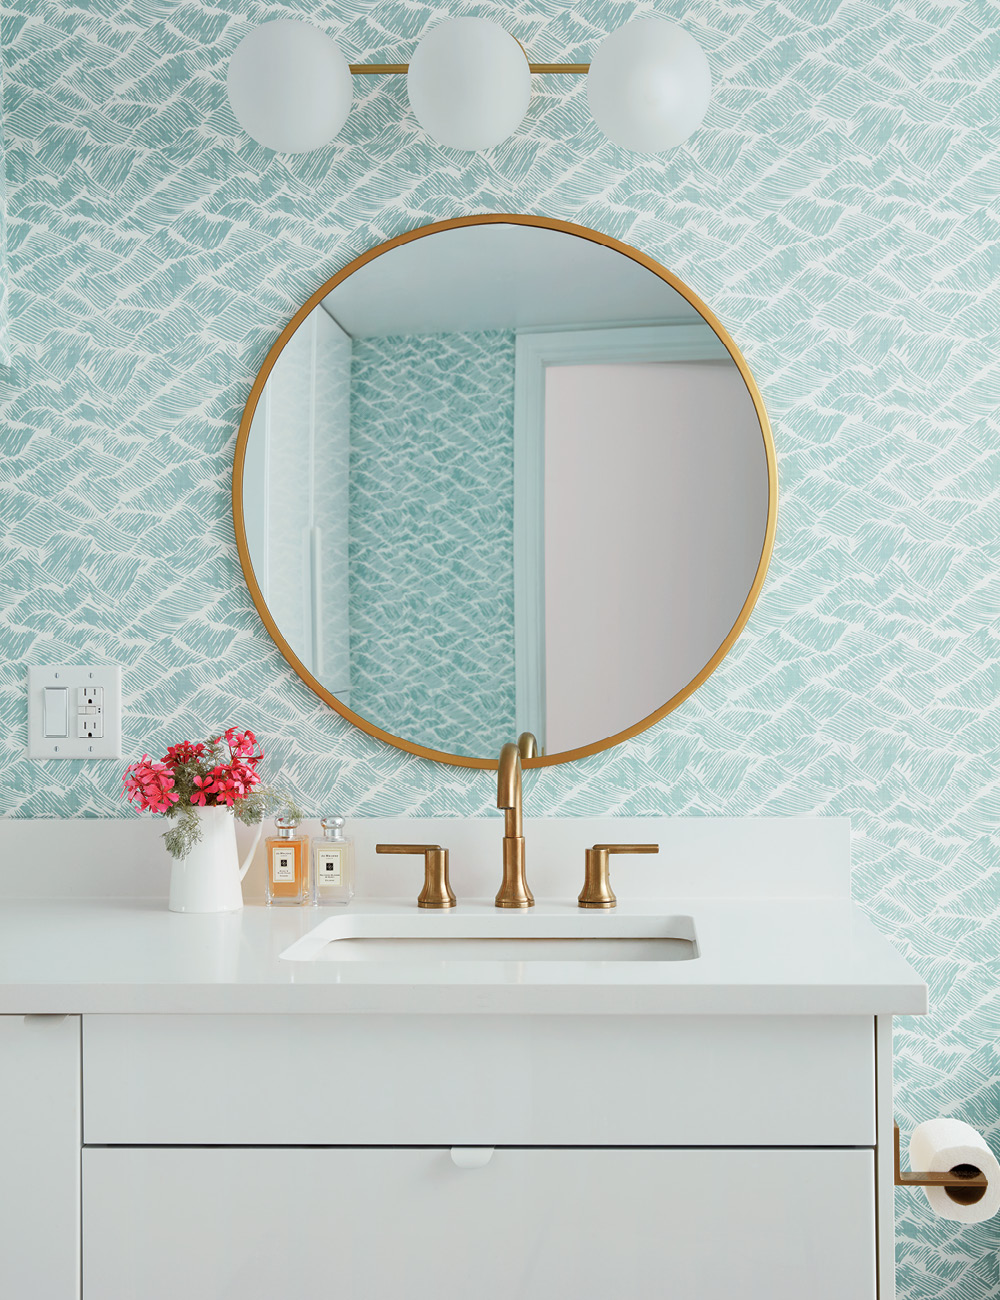 A white bathroom vanity with gold hardware accents and a round mirror on turquoise-patterned wallpaper.